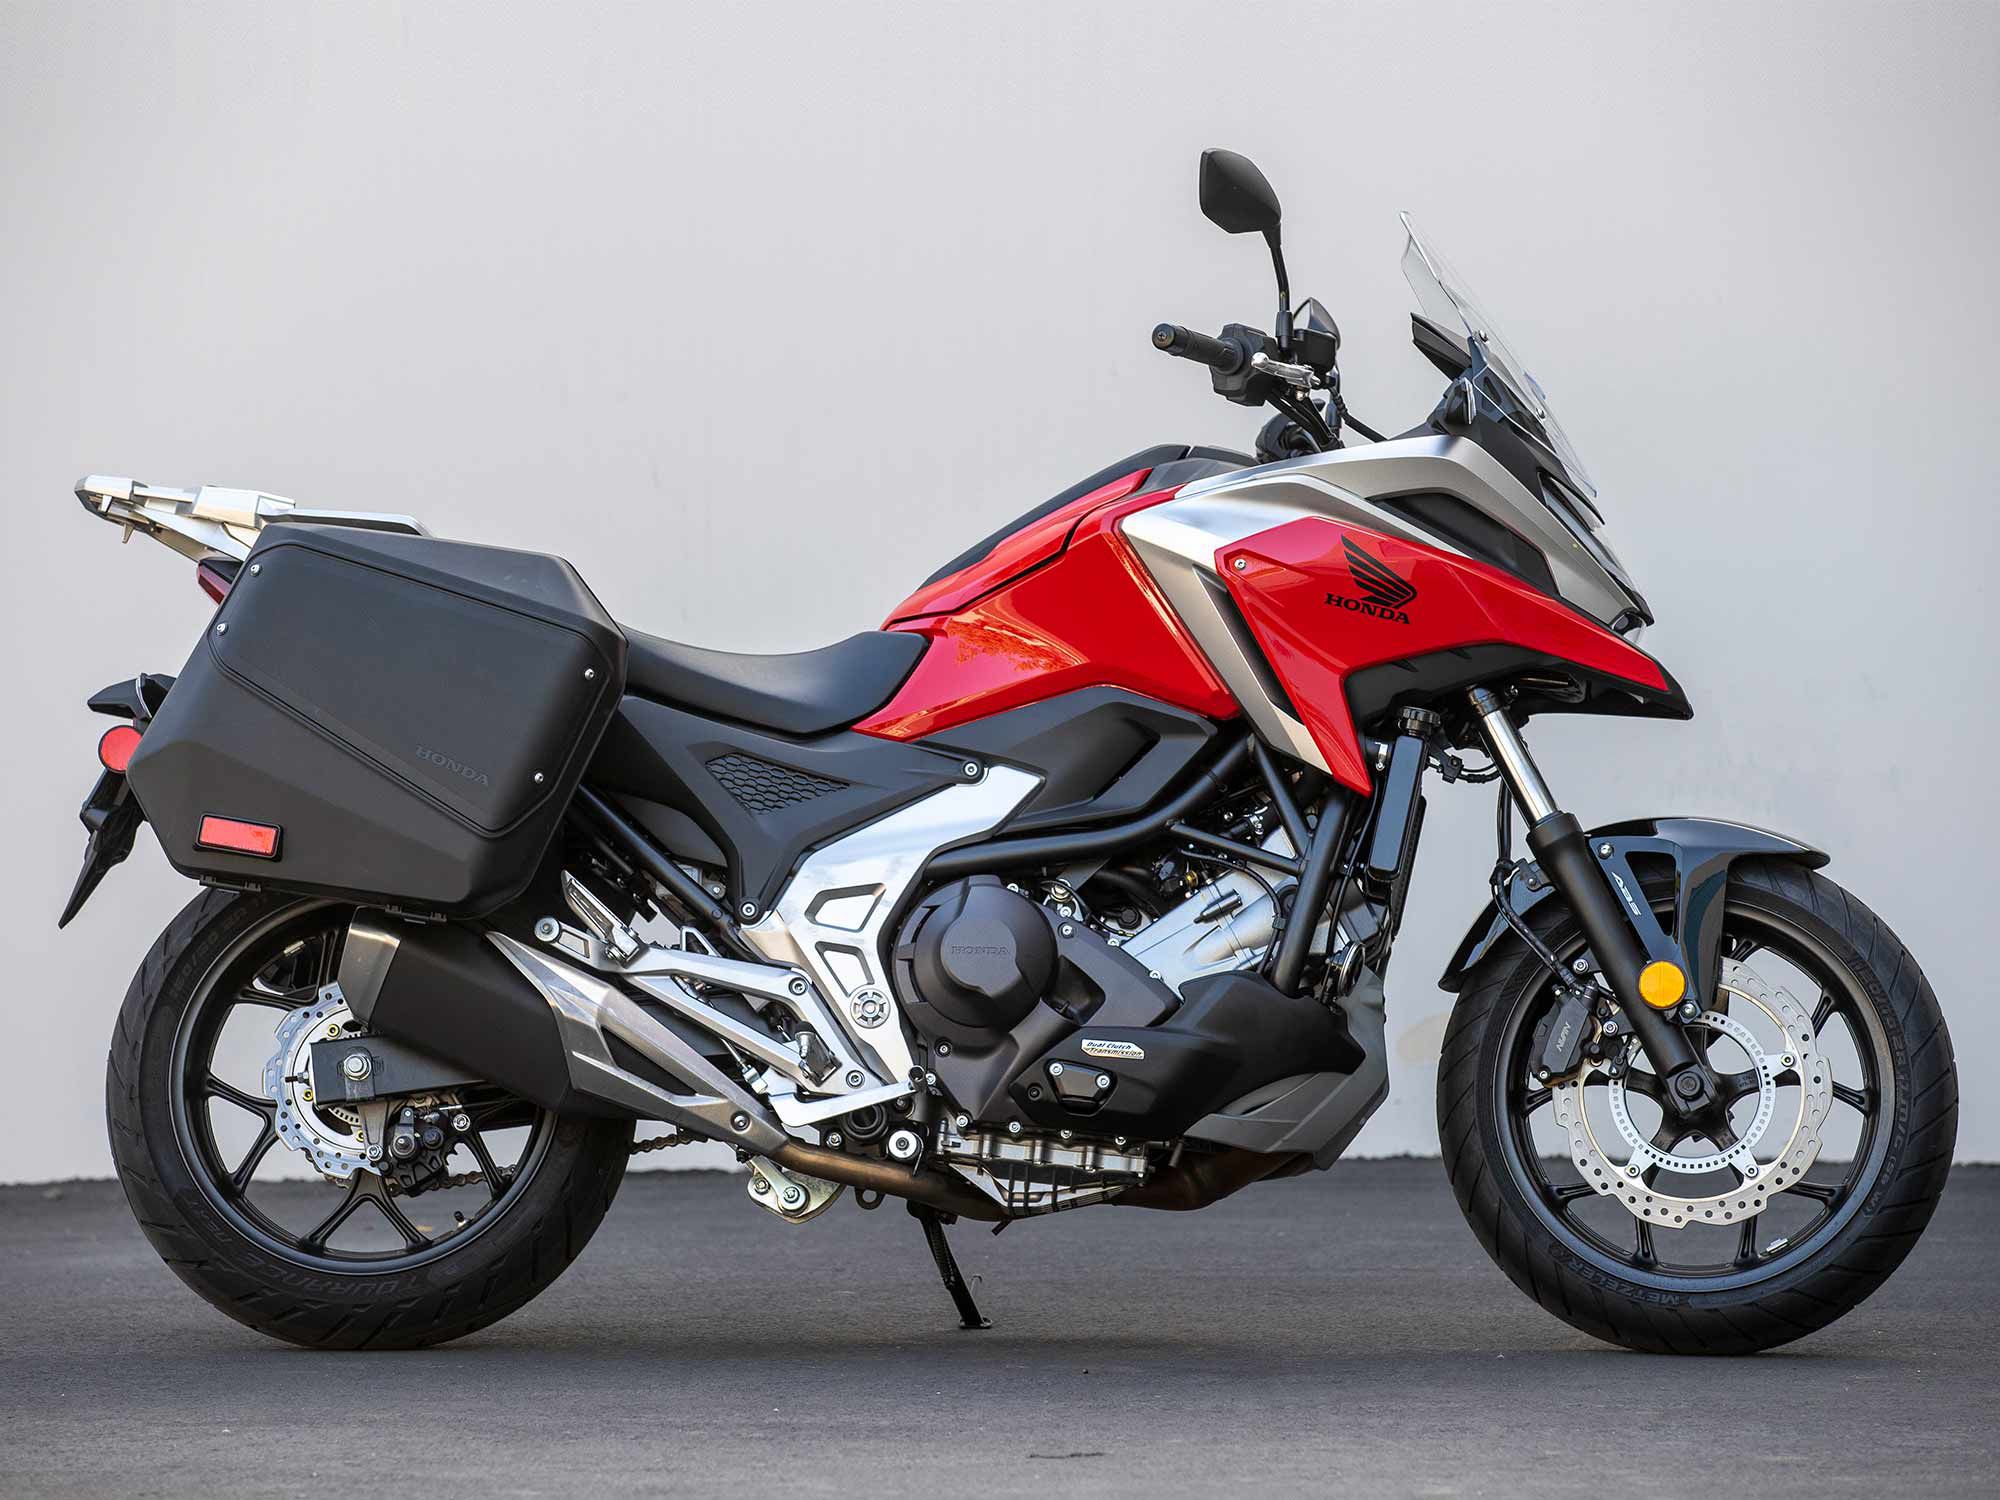 Honda’s NC750X takes fuel efficiency seriously as part of its “New Concept” DNA.